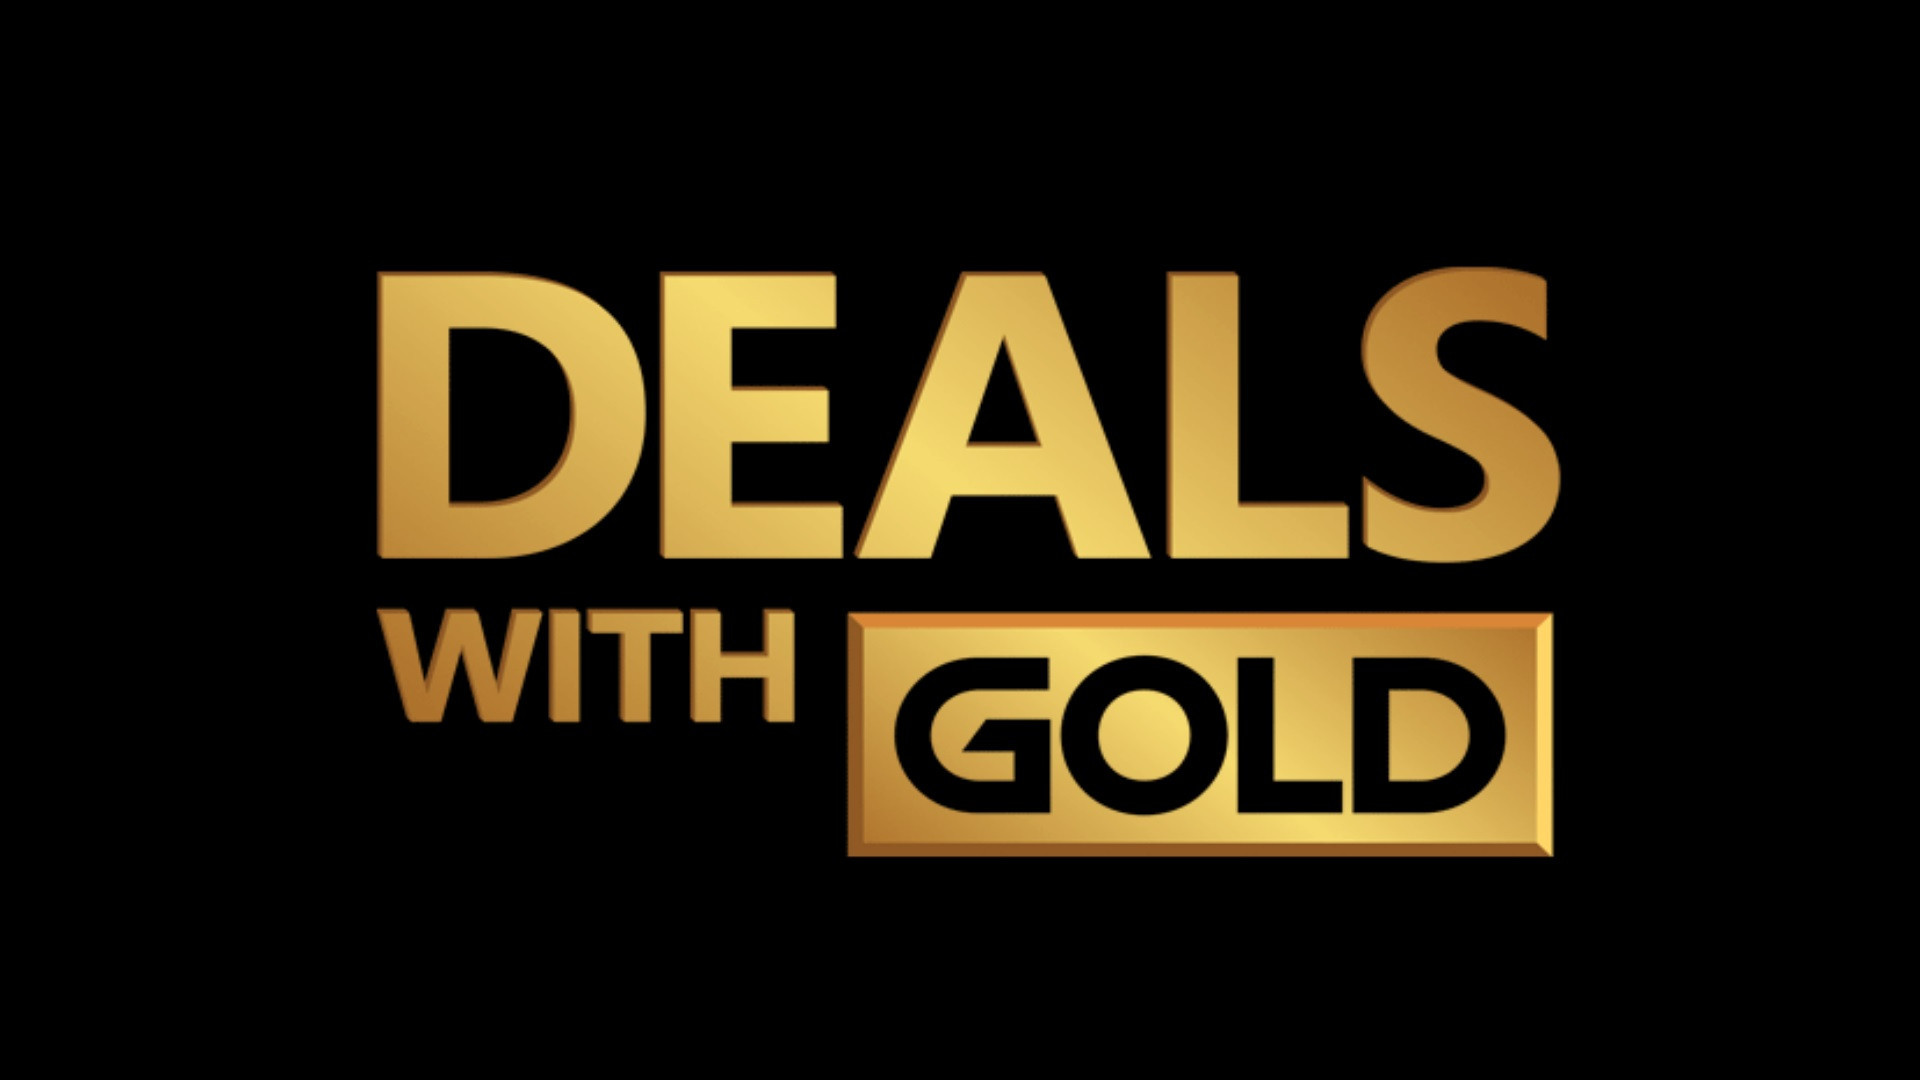 Deals with Gold semaine 48